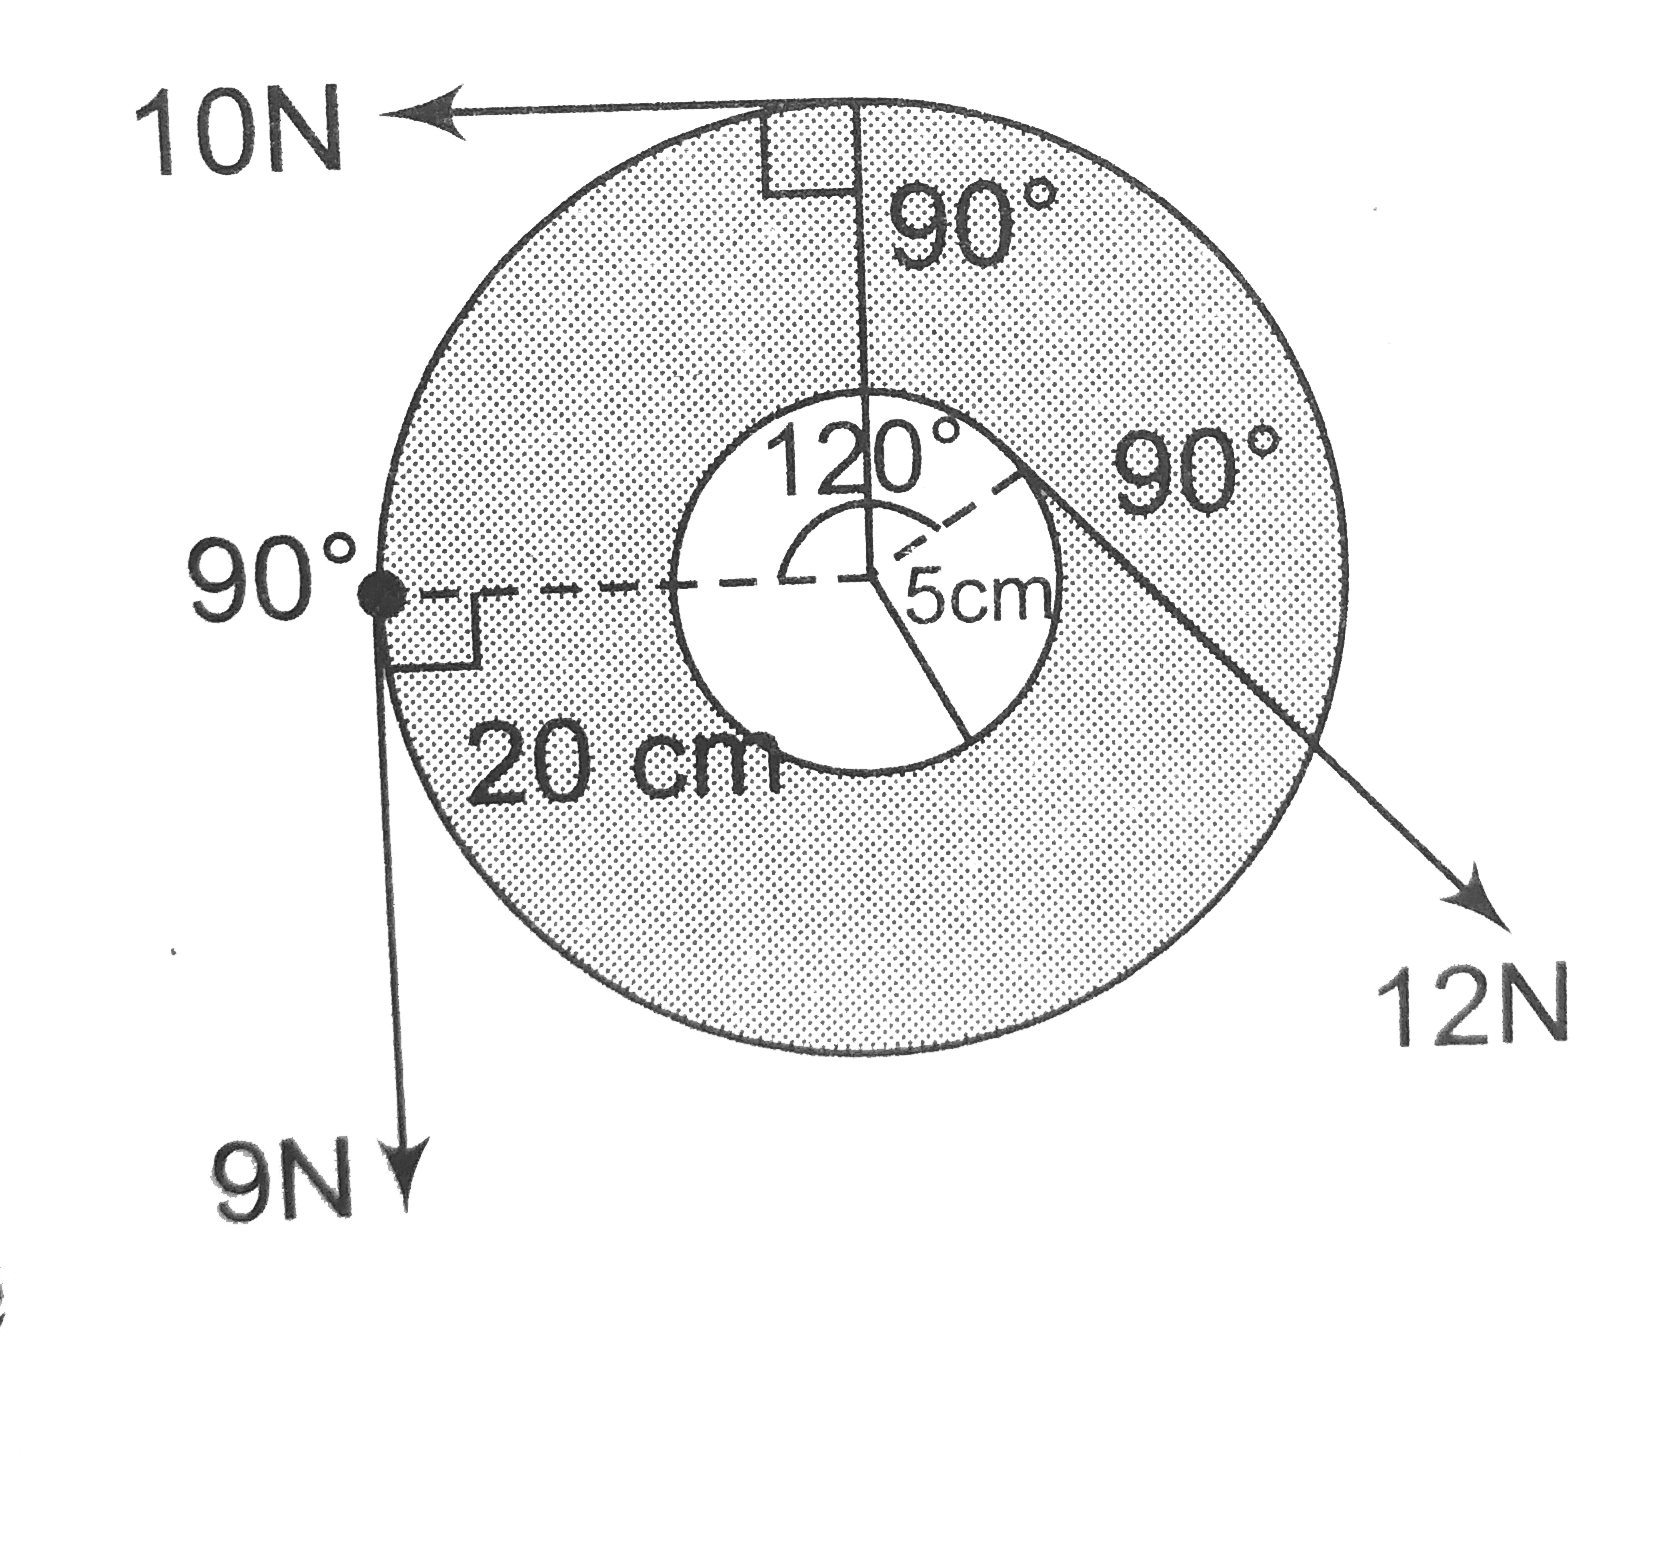 The moment of inertia of an angular wheel shown in figure is 3200 kgm^2. If the inner radius is 5 cm, and the outer radius is 20 cm, and the wheel is acted upon by the forces shown, then the angular acceleration of the wheel is.   .